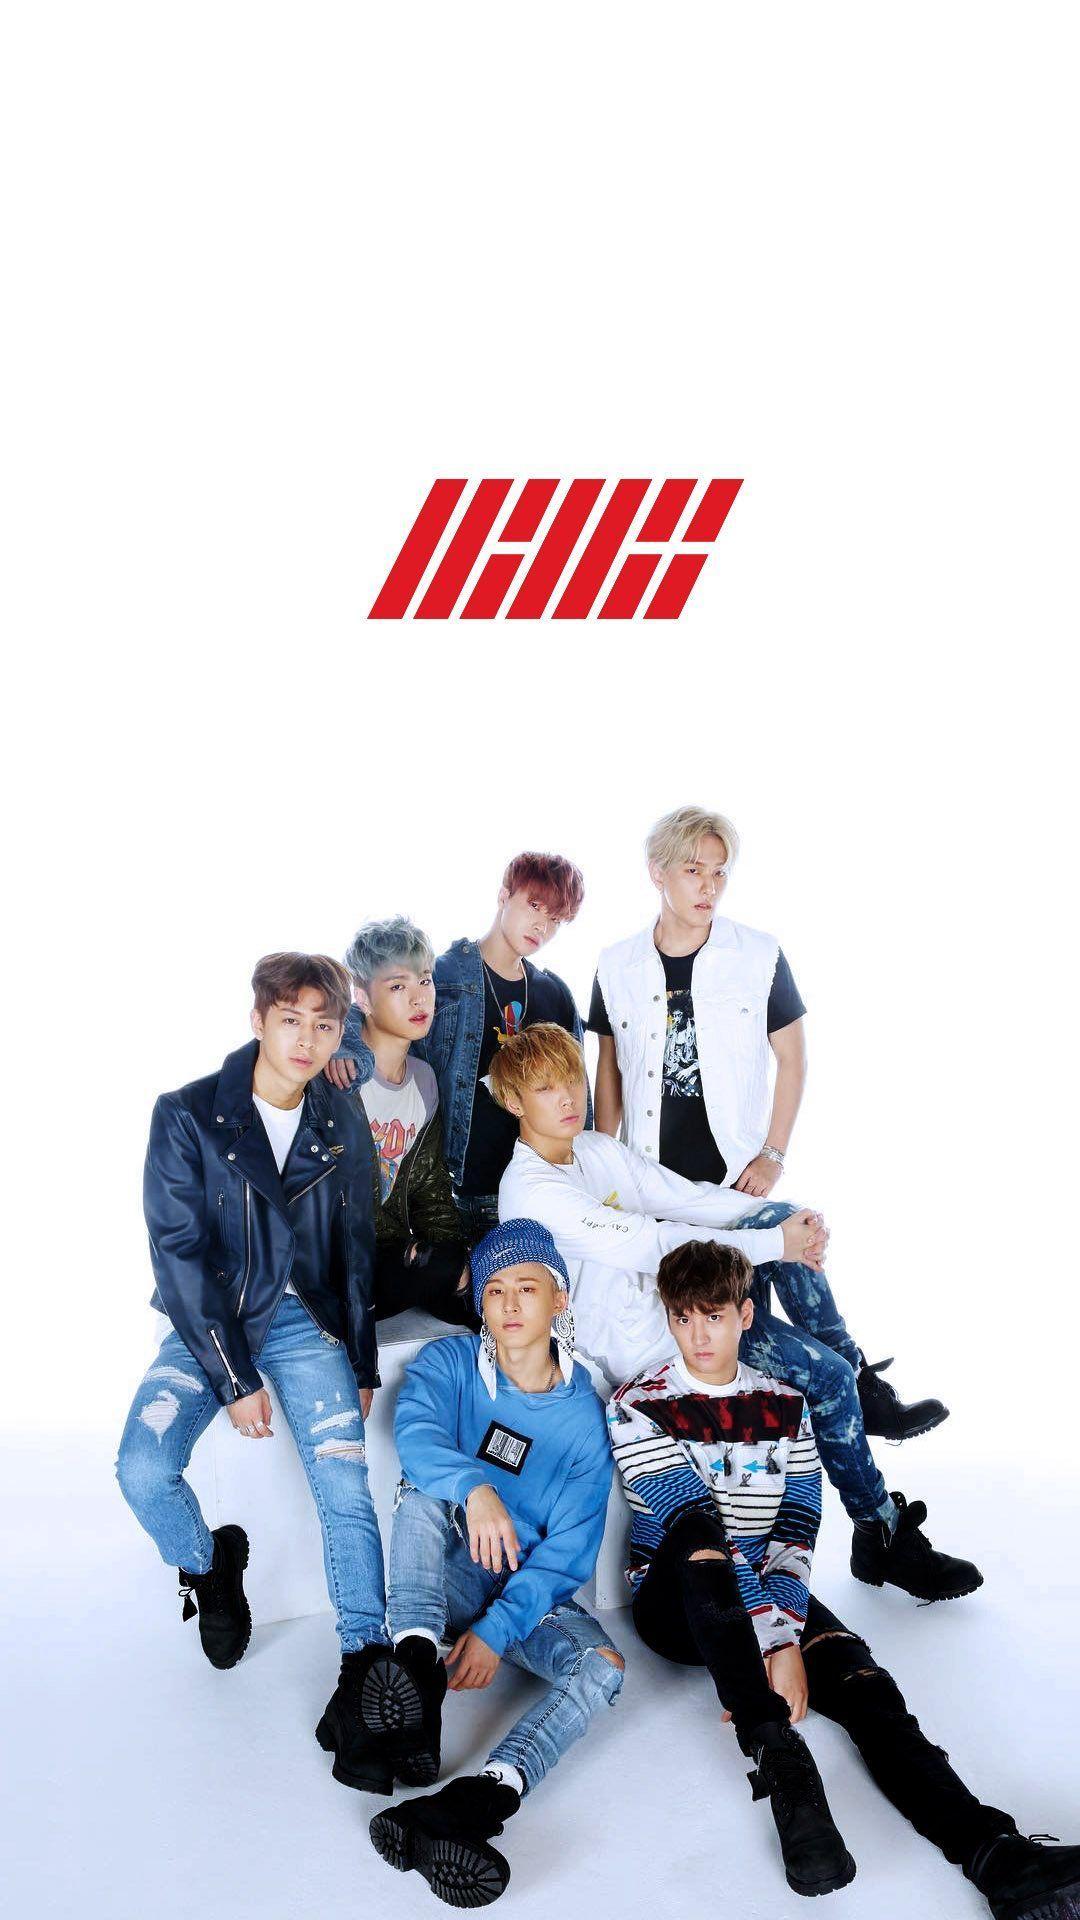 Ikon Hd Wallpaper Kpop For Android Apk Download